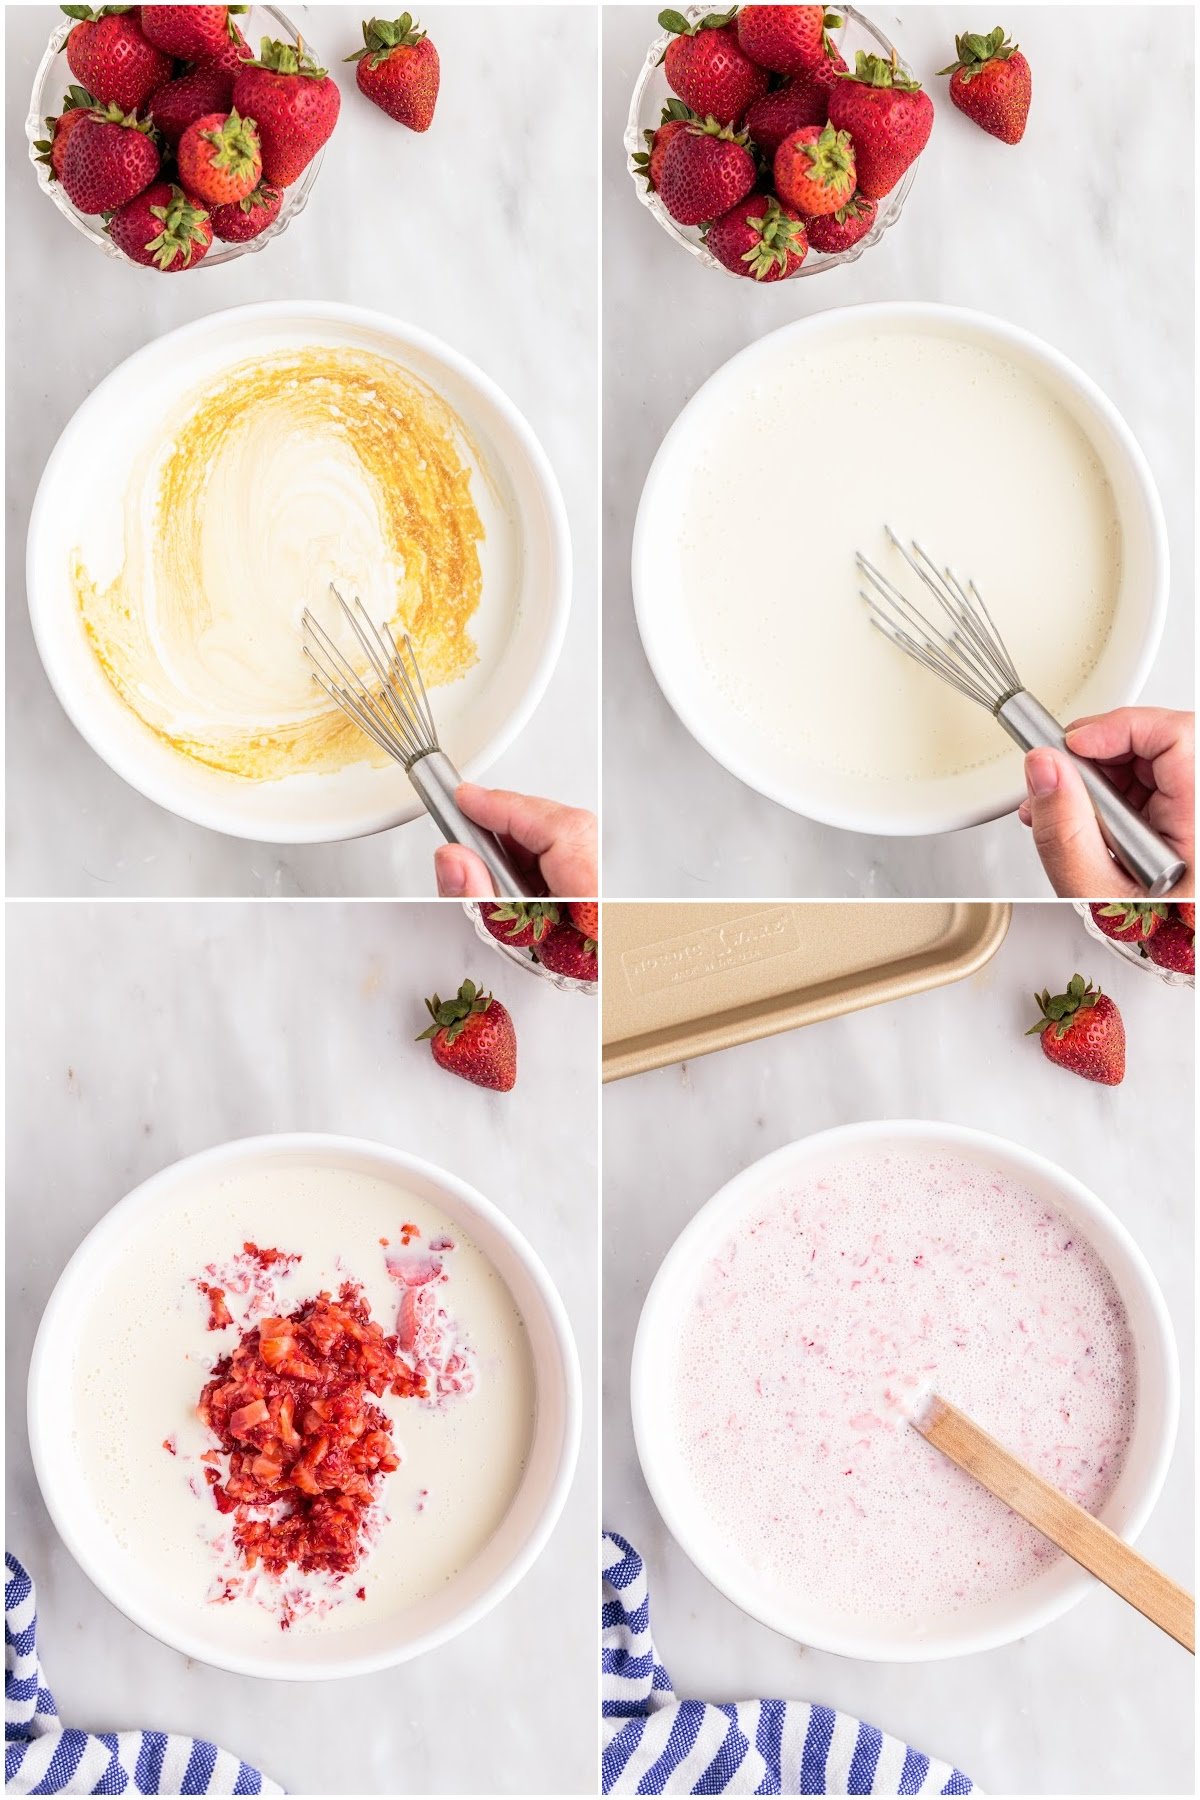 Collage showing whisk in cream/sweetened condensed milk mixture, adding strawberries, and the finished ice cream base.